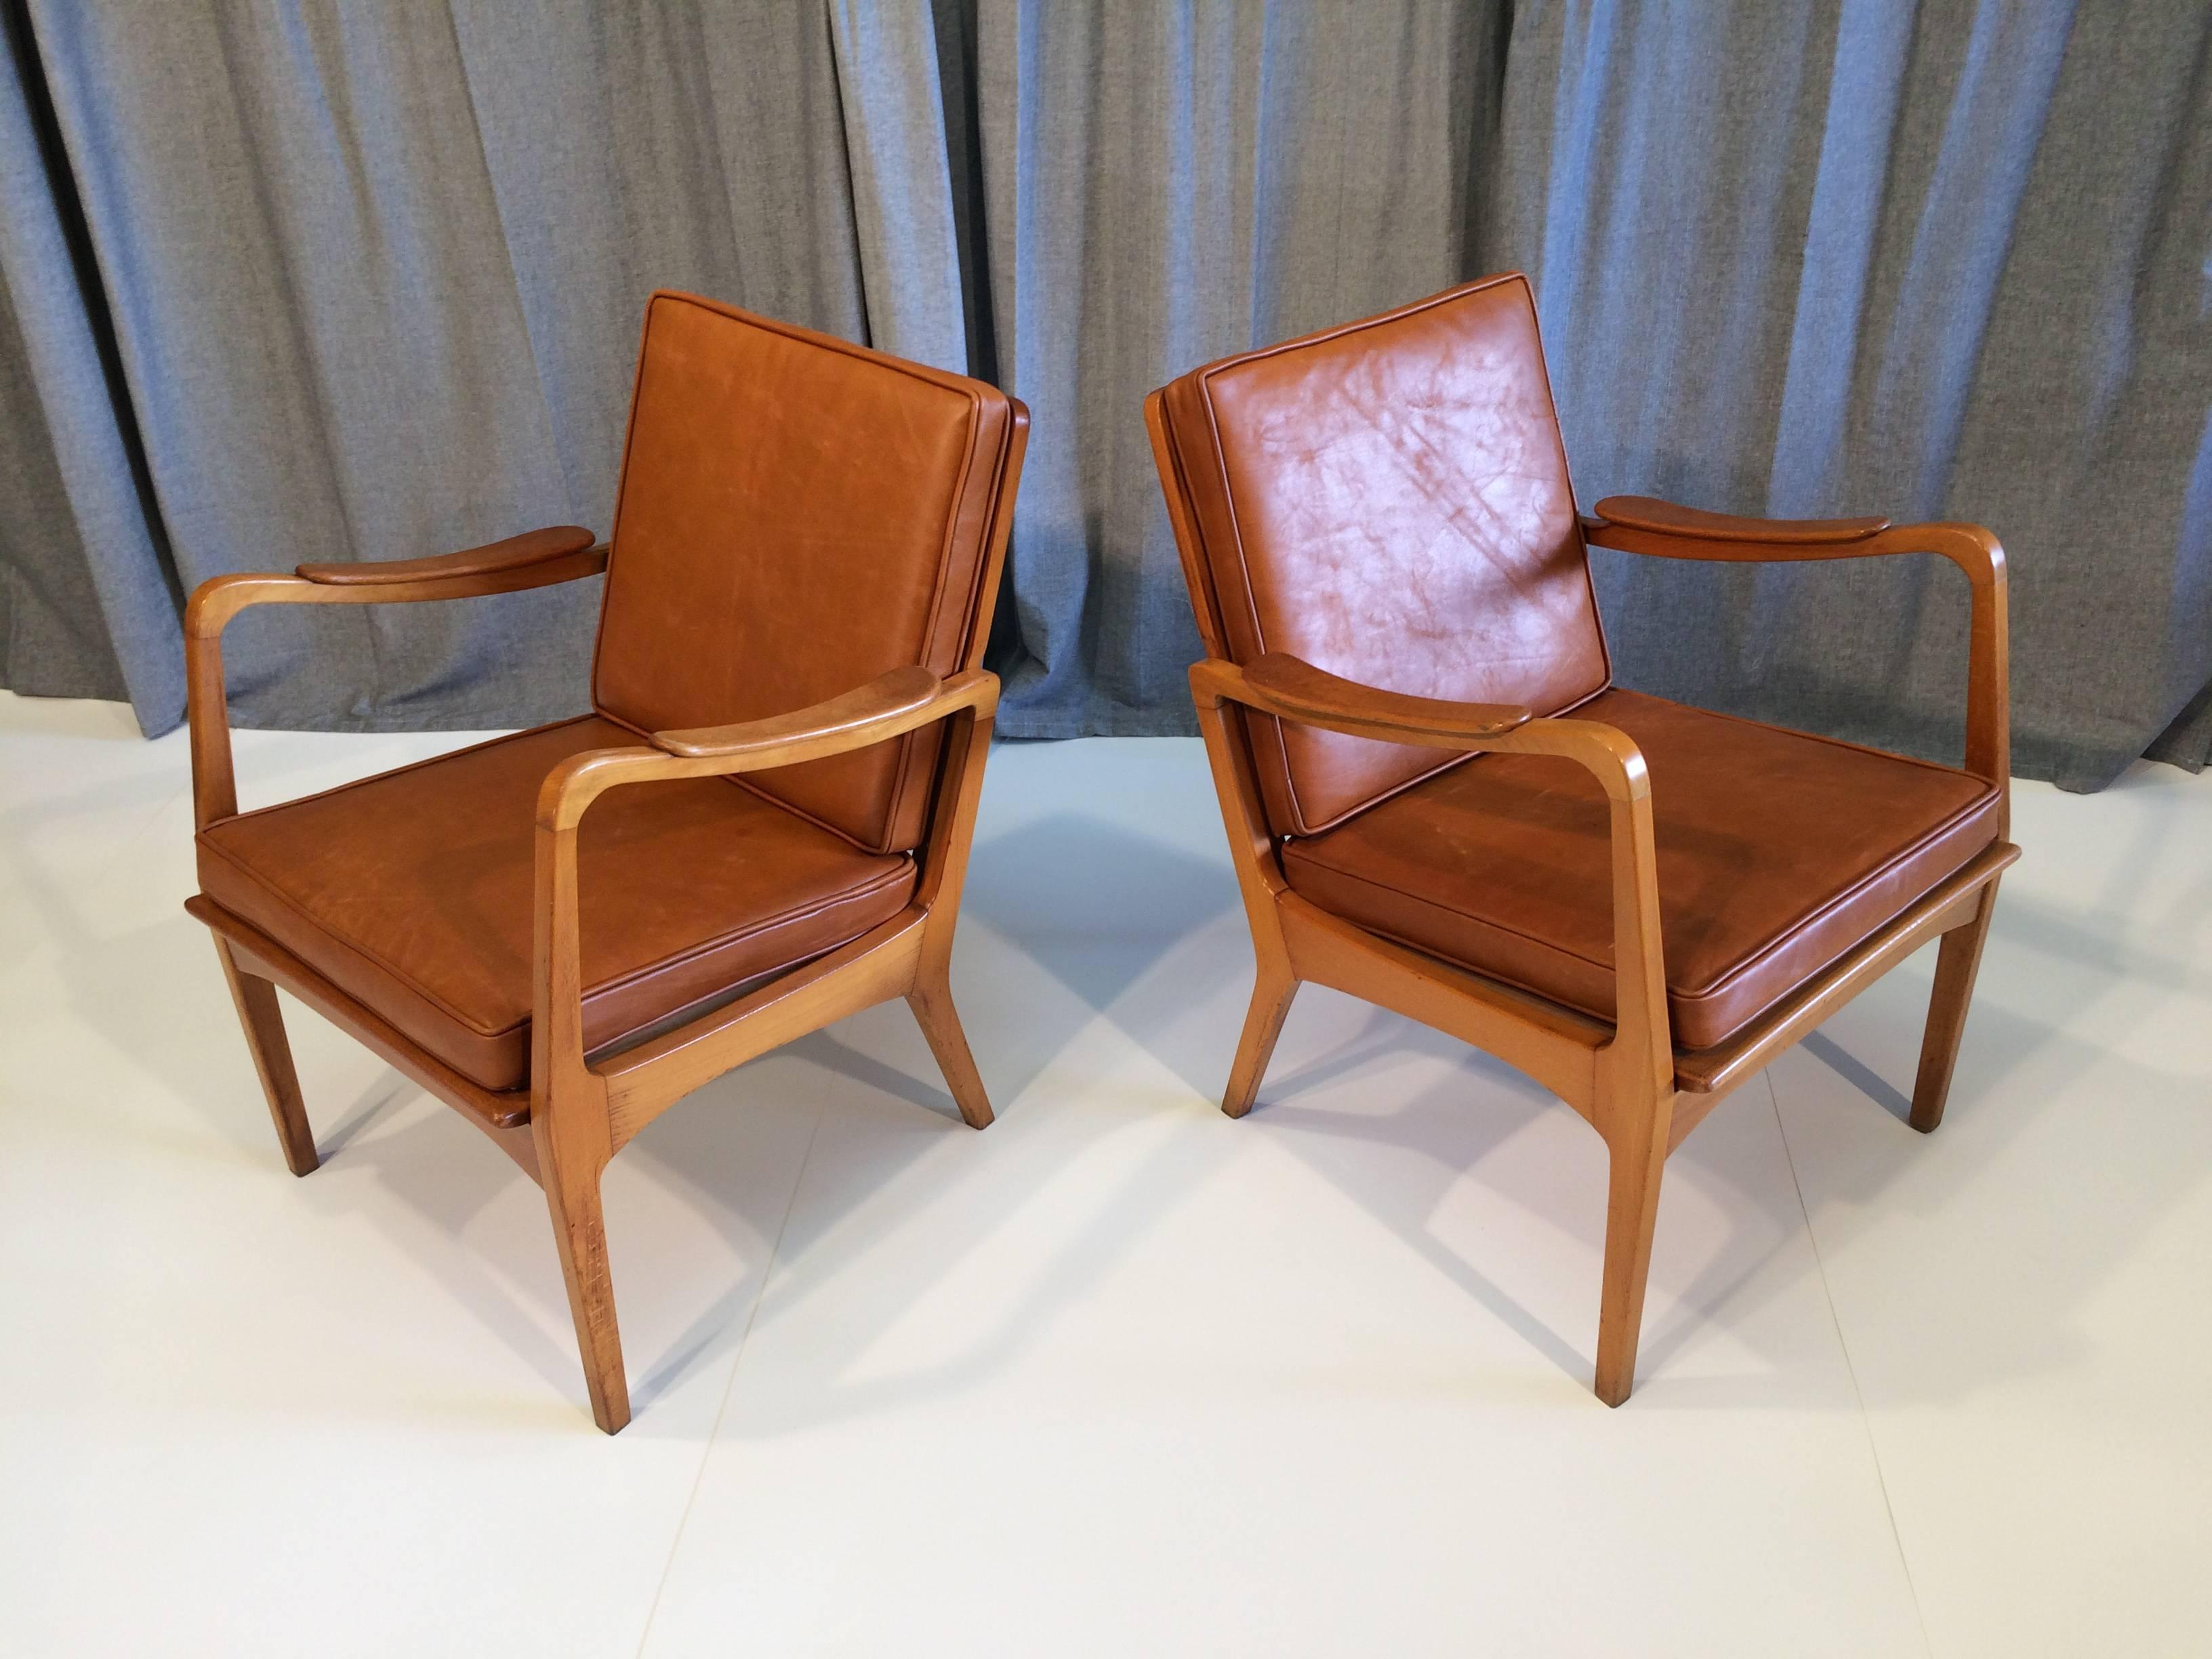 Beautiful Pair of Danish Armchairs, Denmark, 1950s Birch and Cognac Leather 3